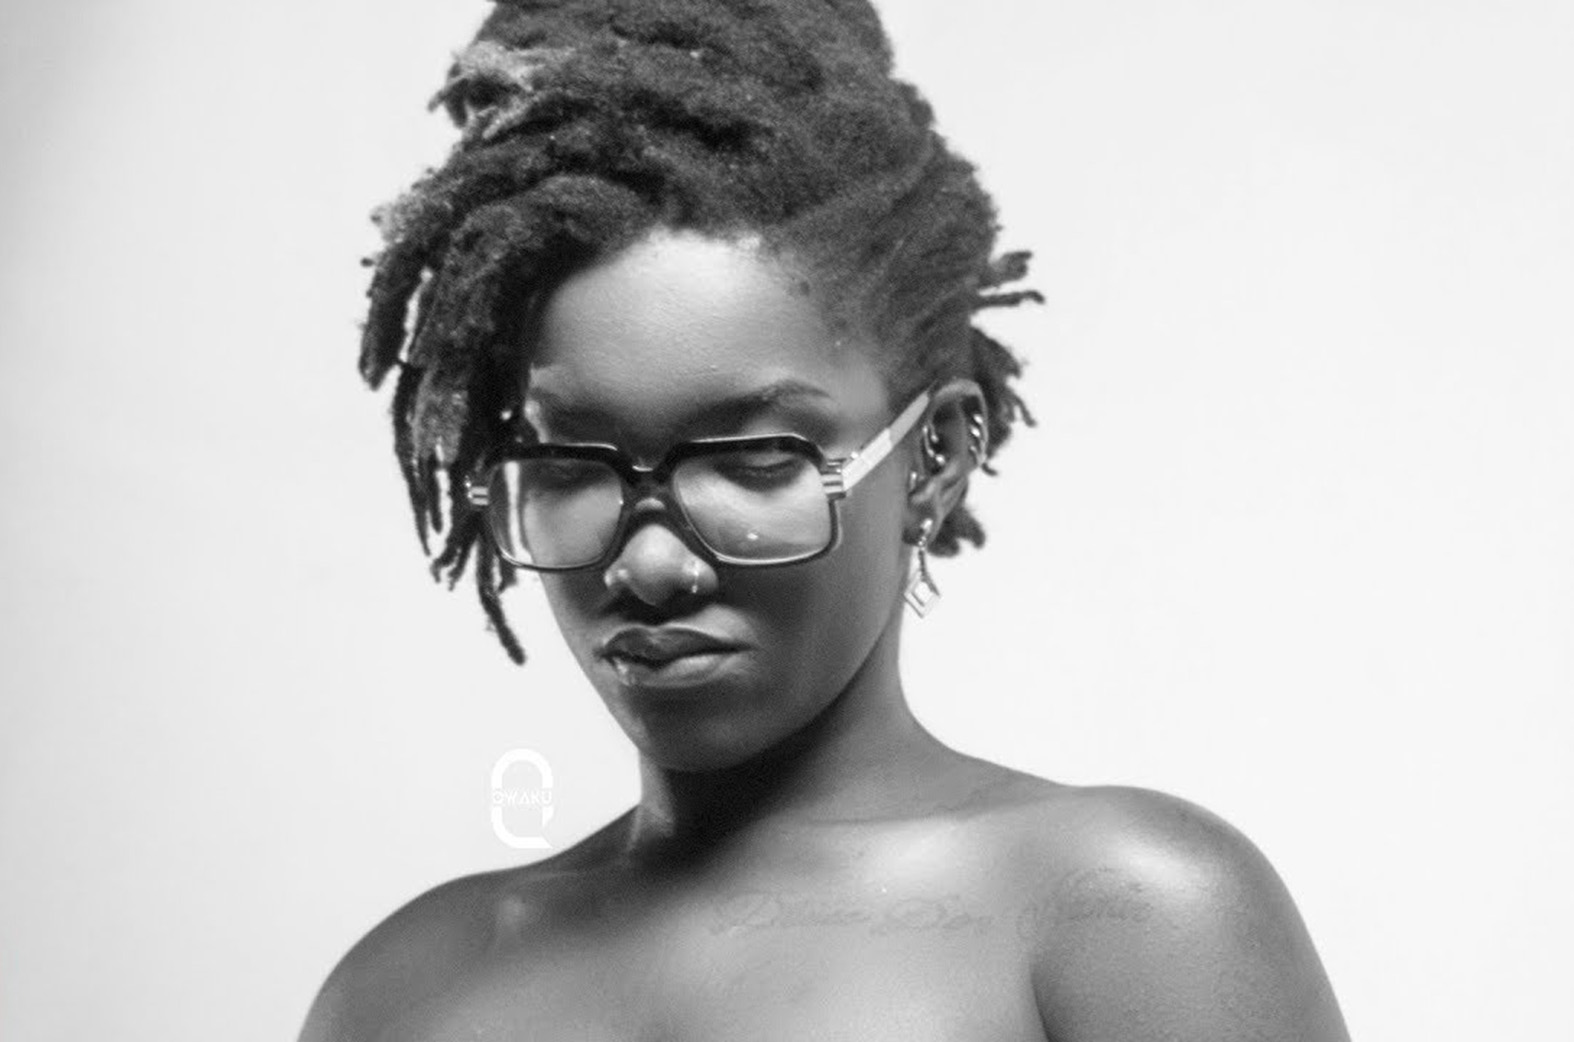 Ebony Reigns wins the VGMA Artiste of the year 2018